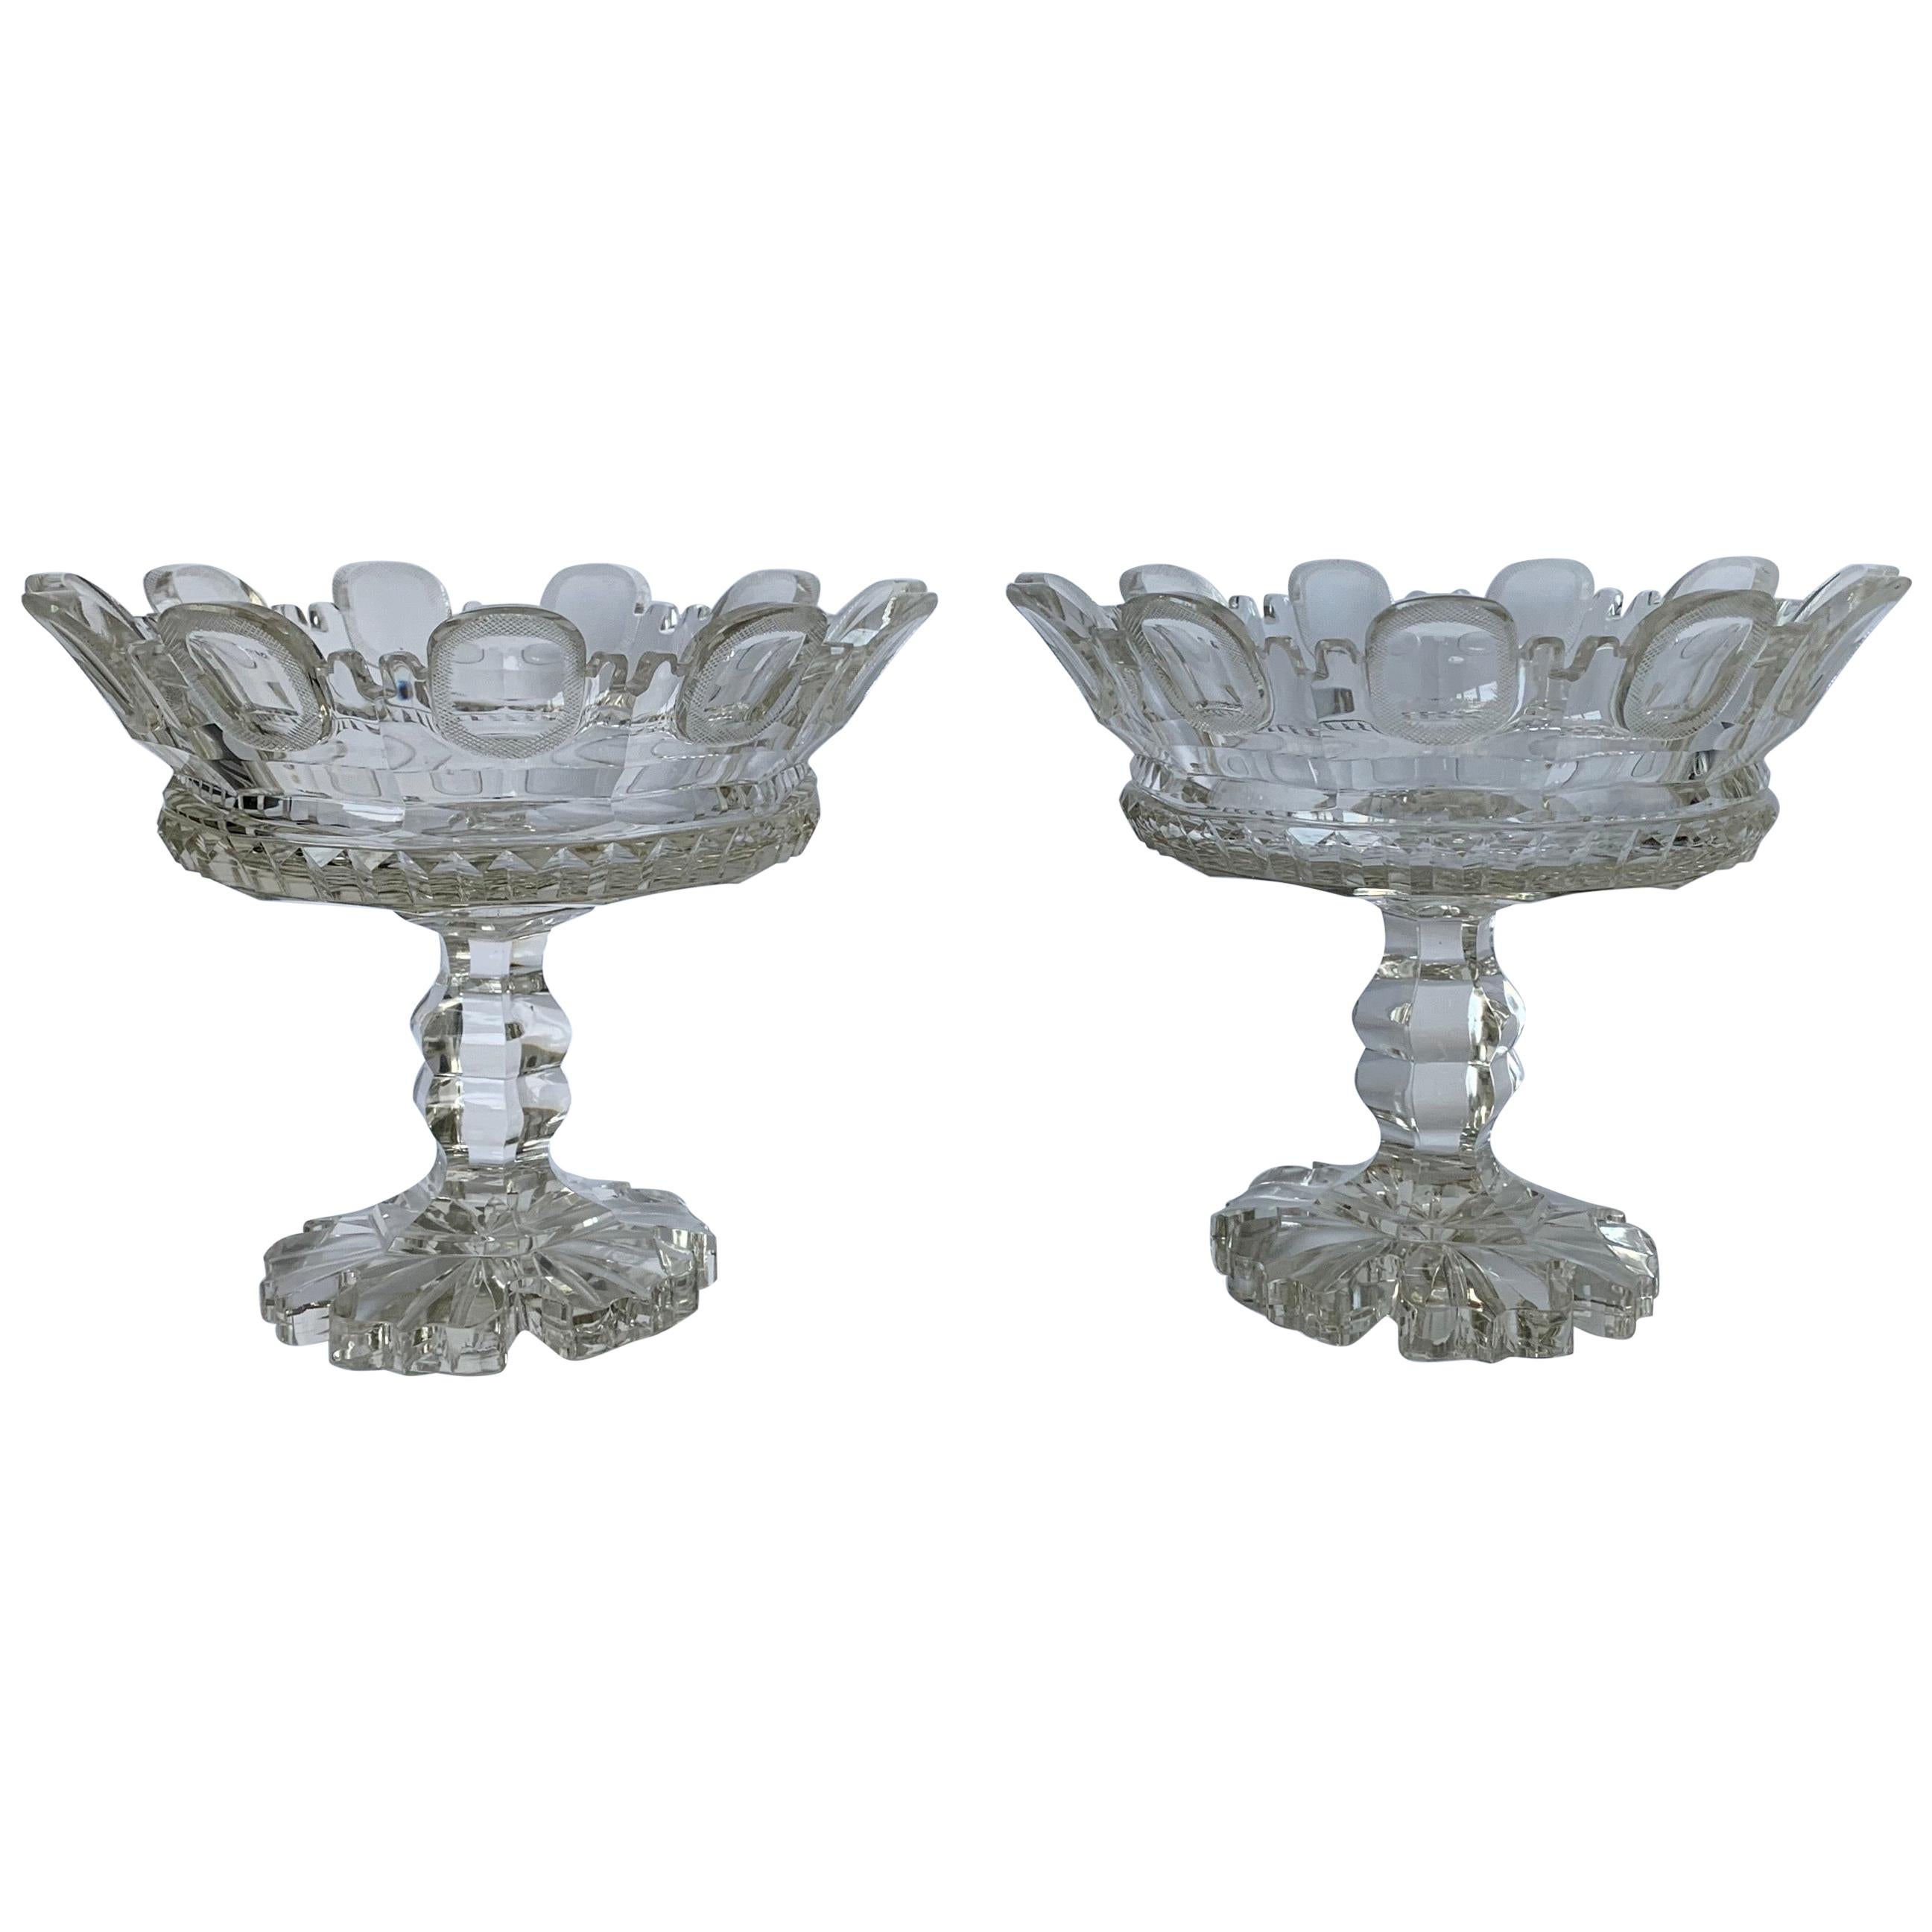 Pair of 1820s Cut Crystal Mantle Vases For Sale